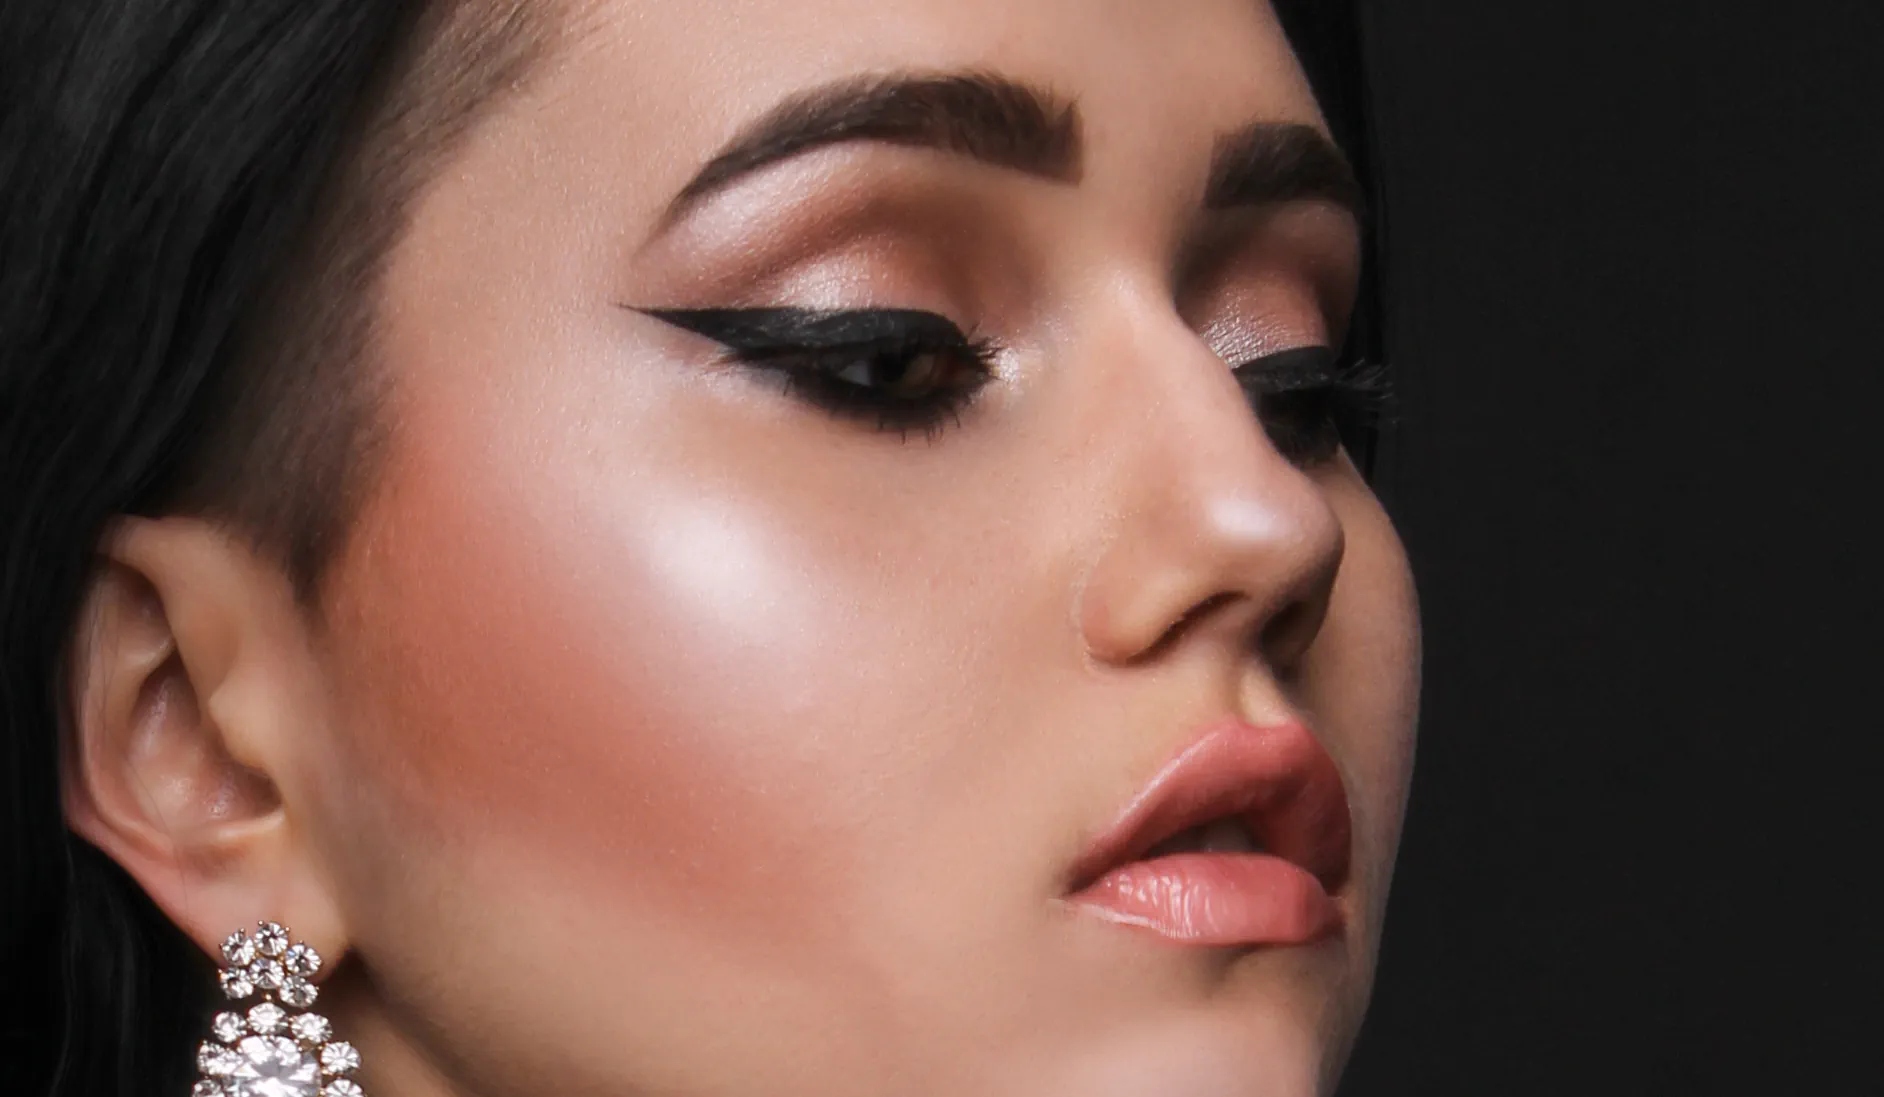 Model with prominent blusher and highlighter